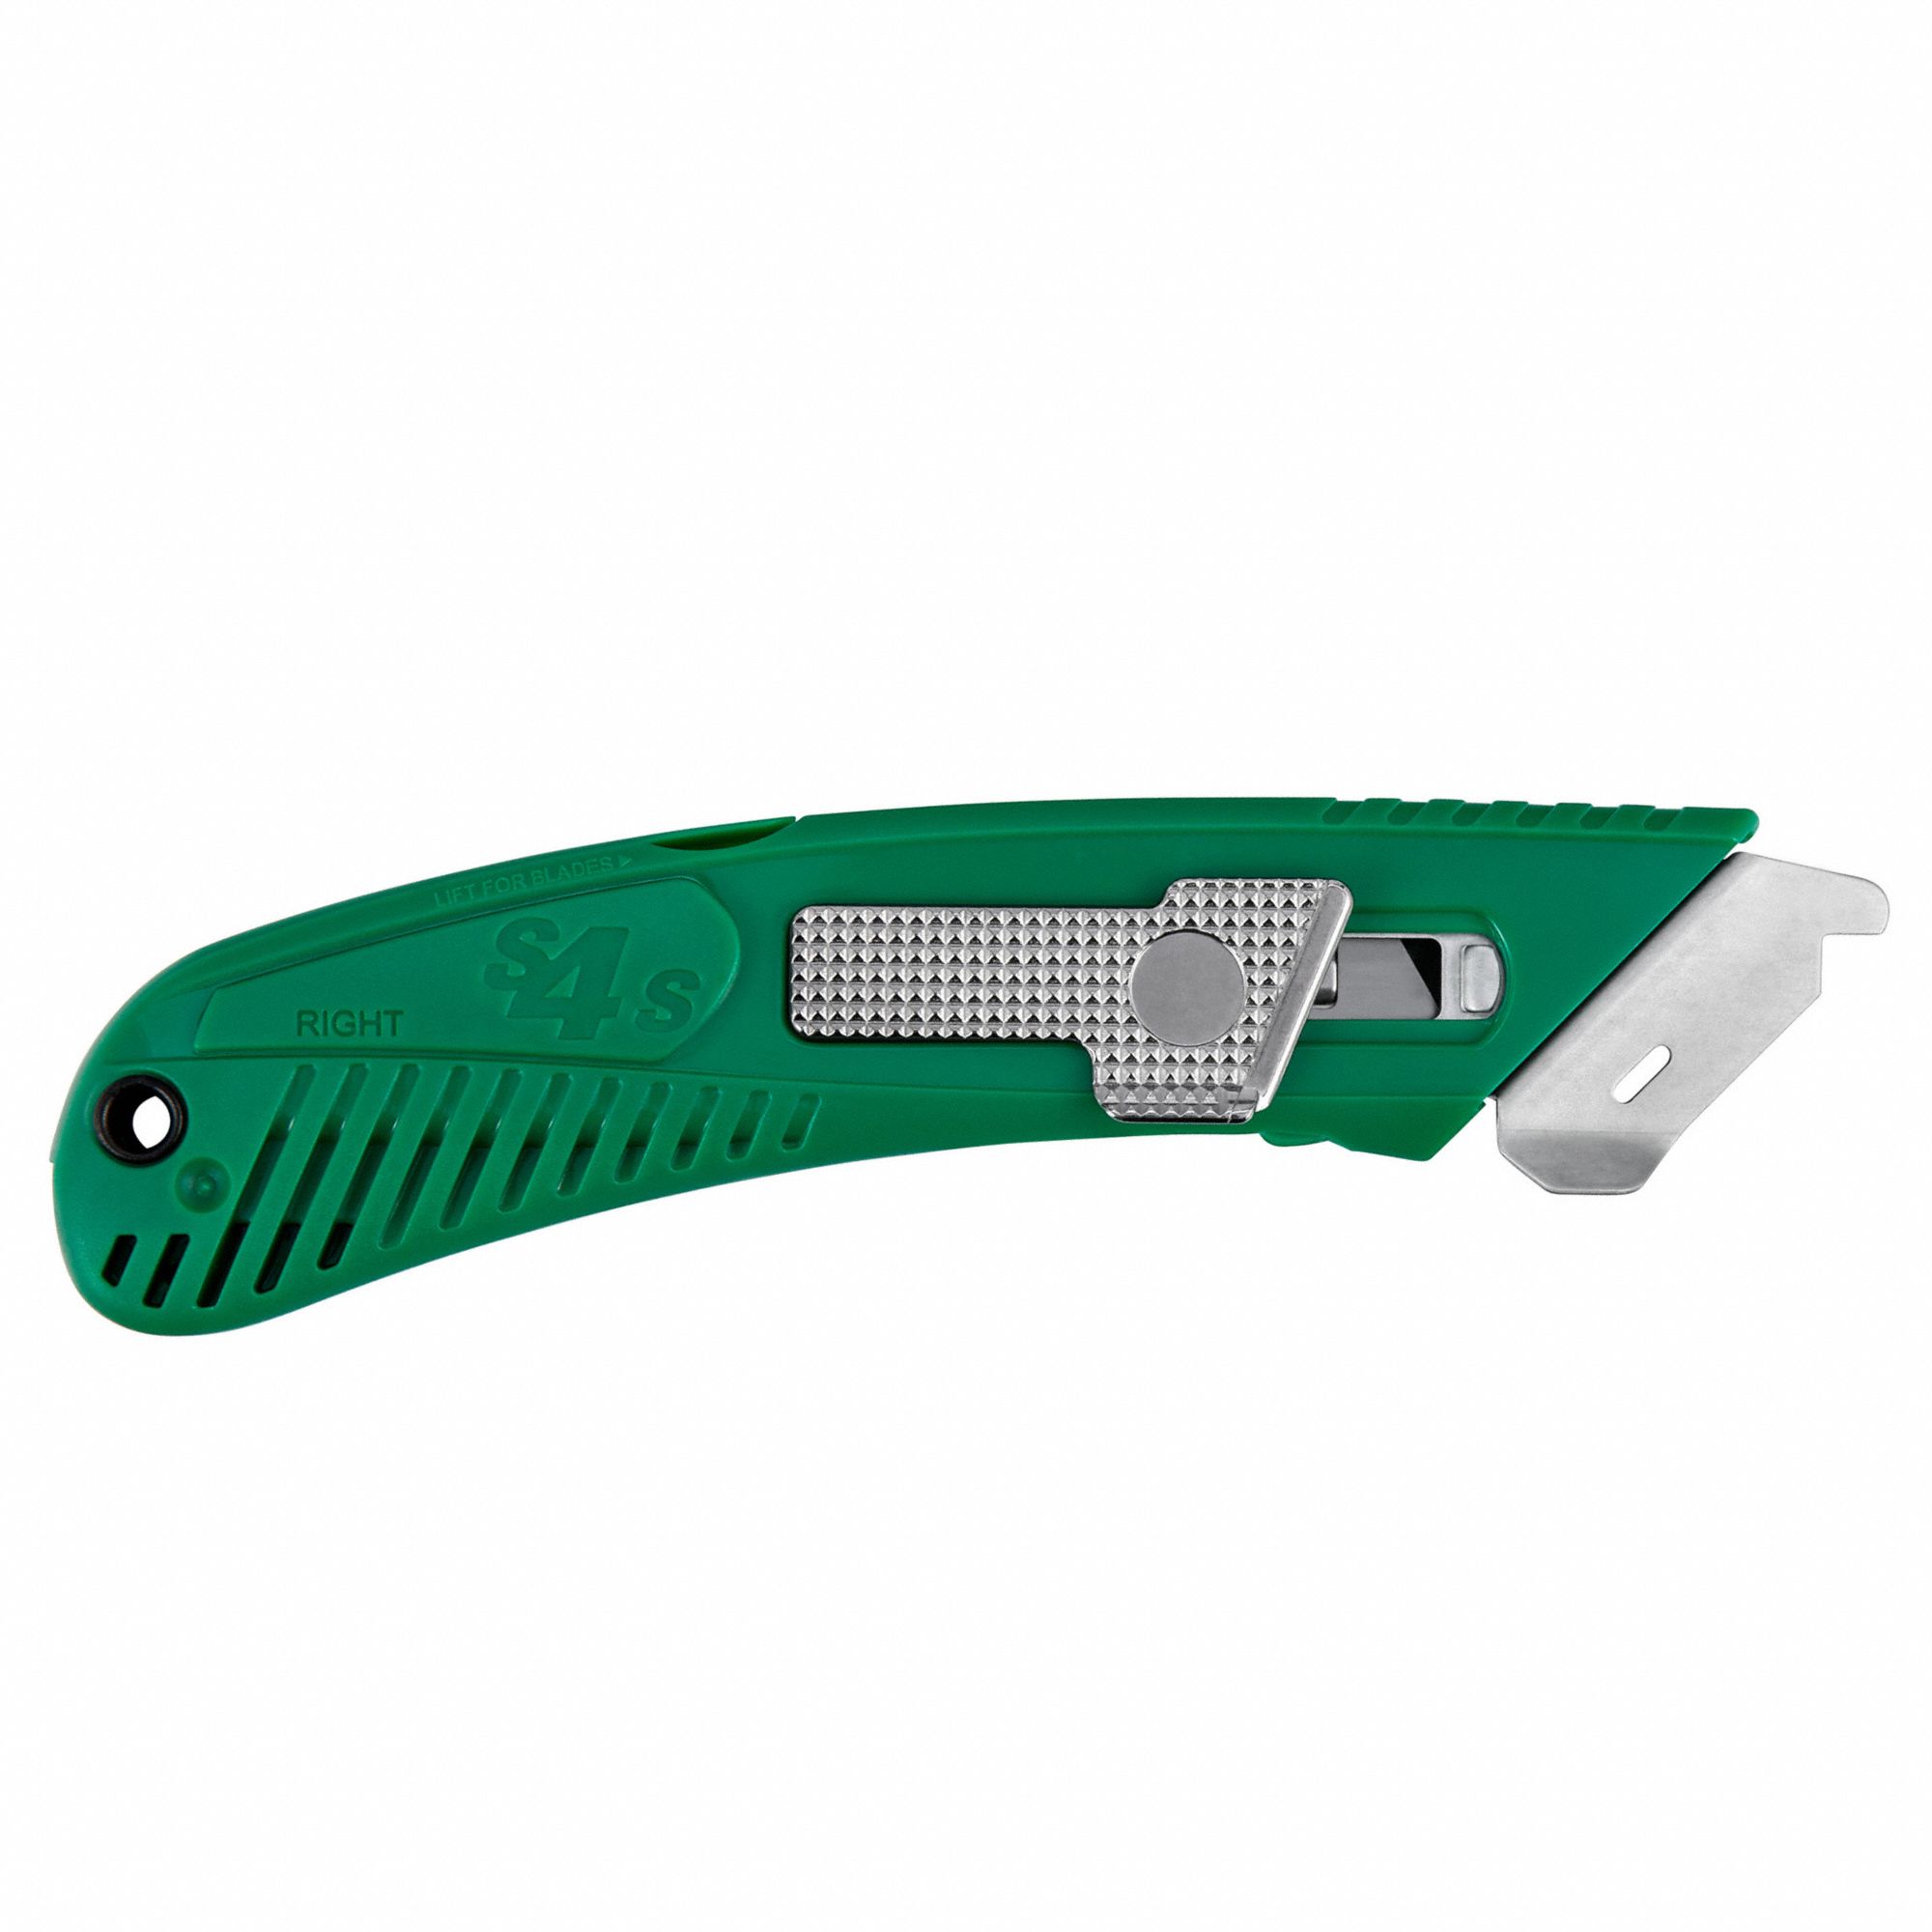 NEW PACIFIC HANDY PHC S4R RIGHT SAFTEY BOX CUTTER 